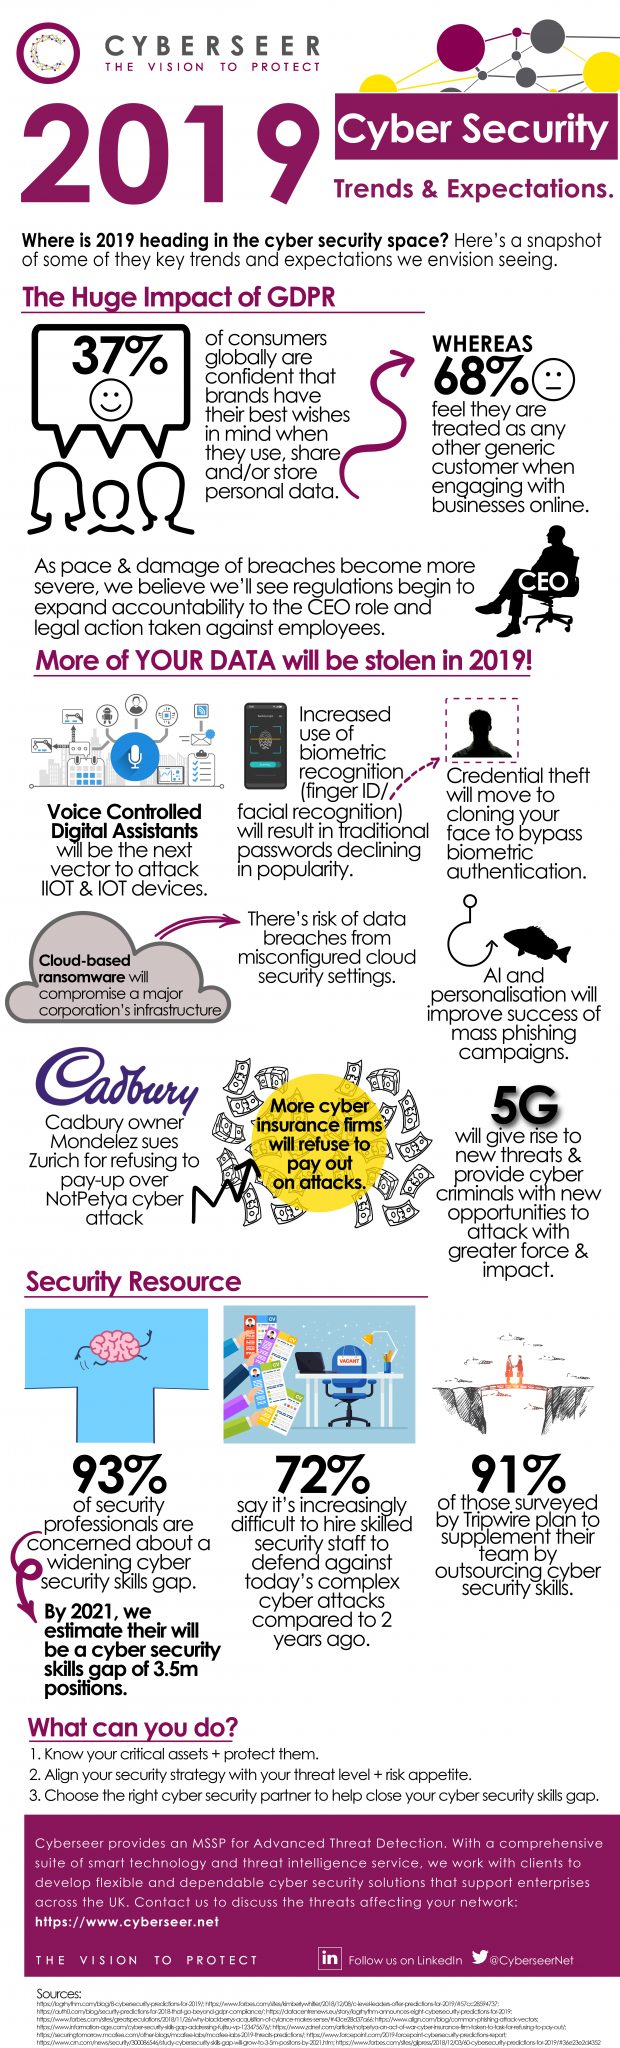 infographic-2019-cyber-security-trends-expectations-1